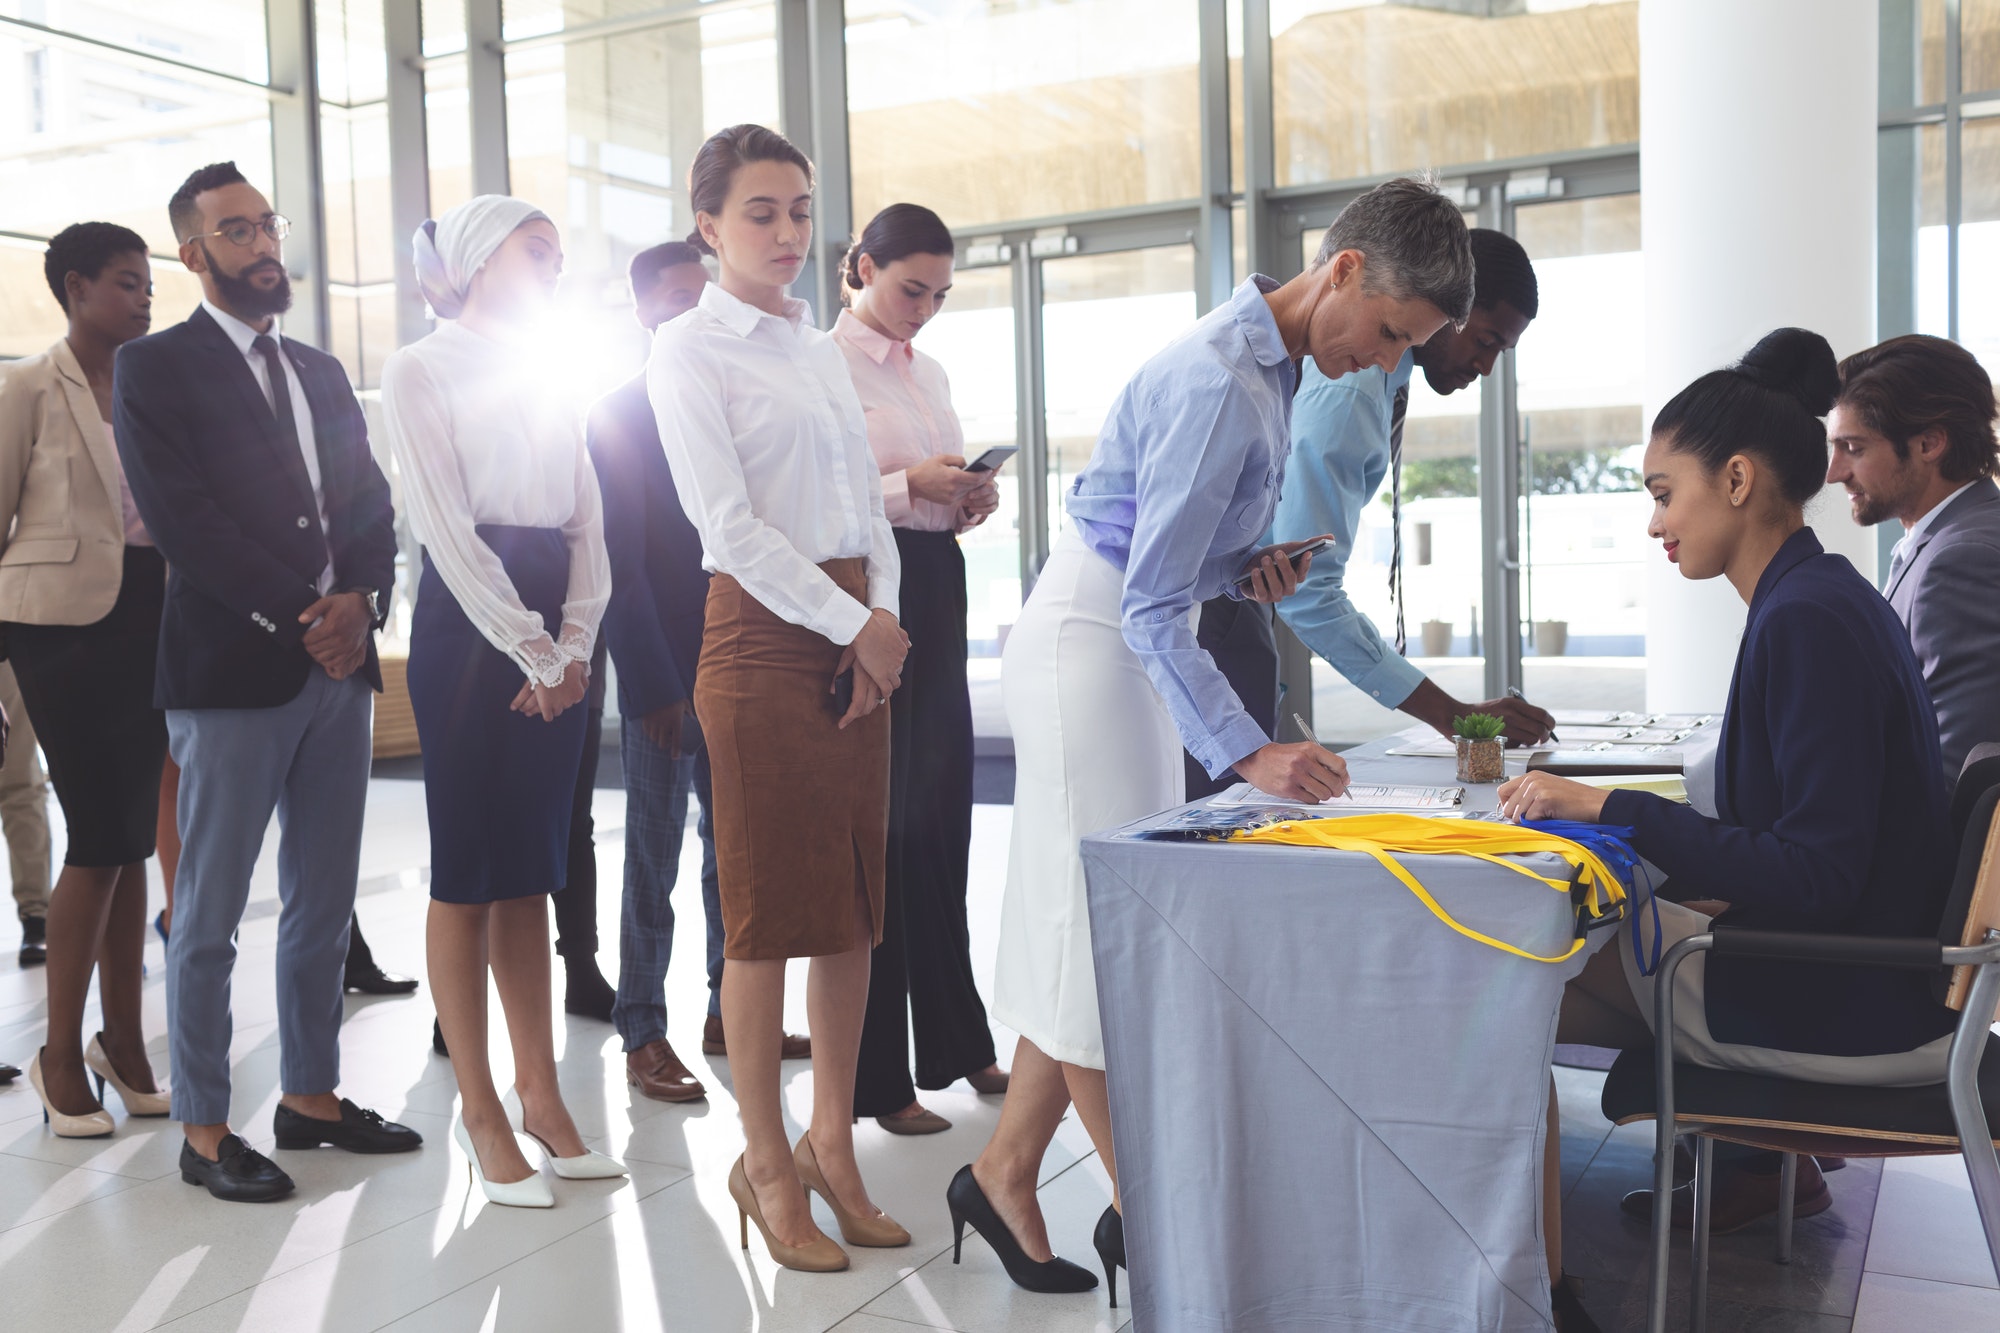 Businesswoman and businessman signing in at conference registration table while group